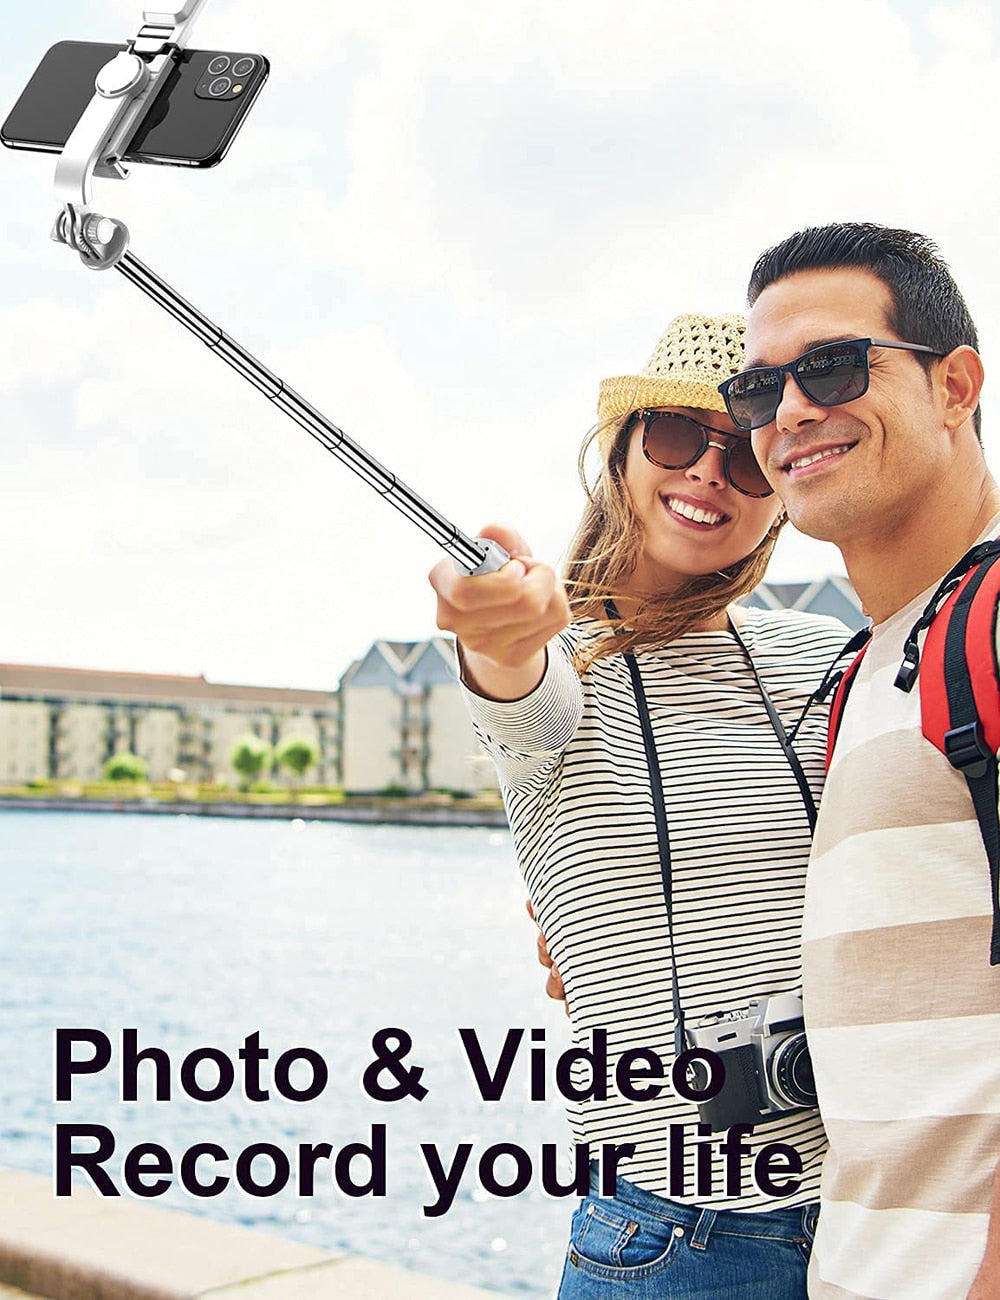 Bluetooth Selfie Stick Tripod with Light & Remote | Foldable, Compact